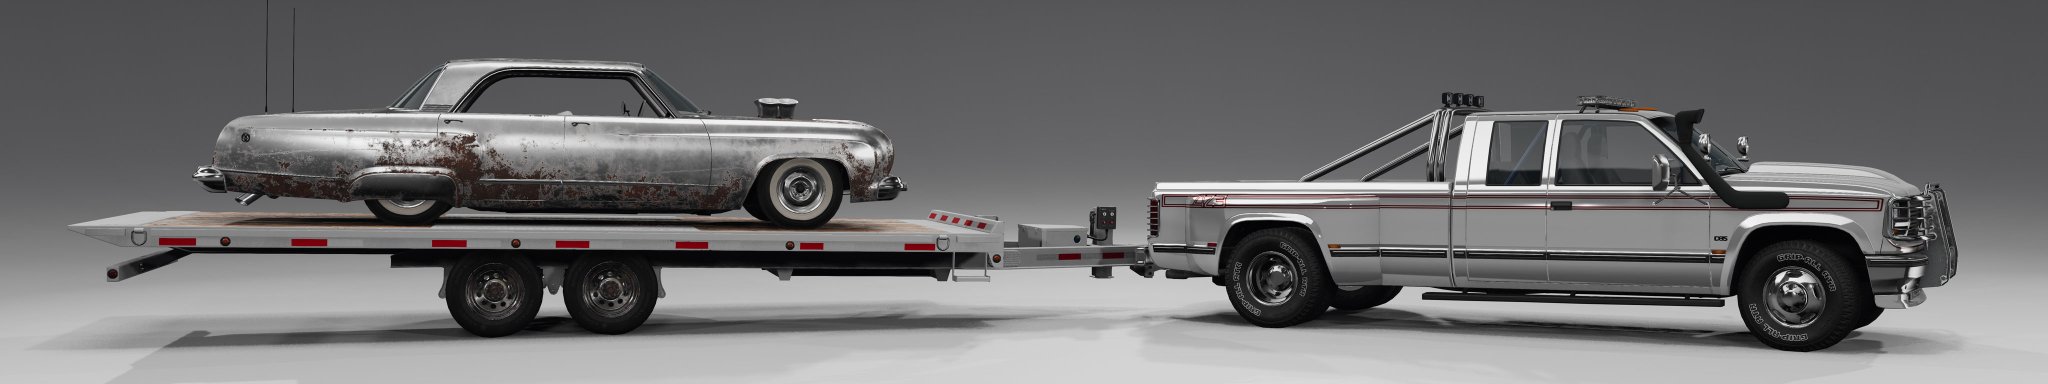 0 BeamNG SHOWROOM DUALLY with TRAILER and Bluebuck SOOT SLED copy.jpg